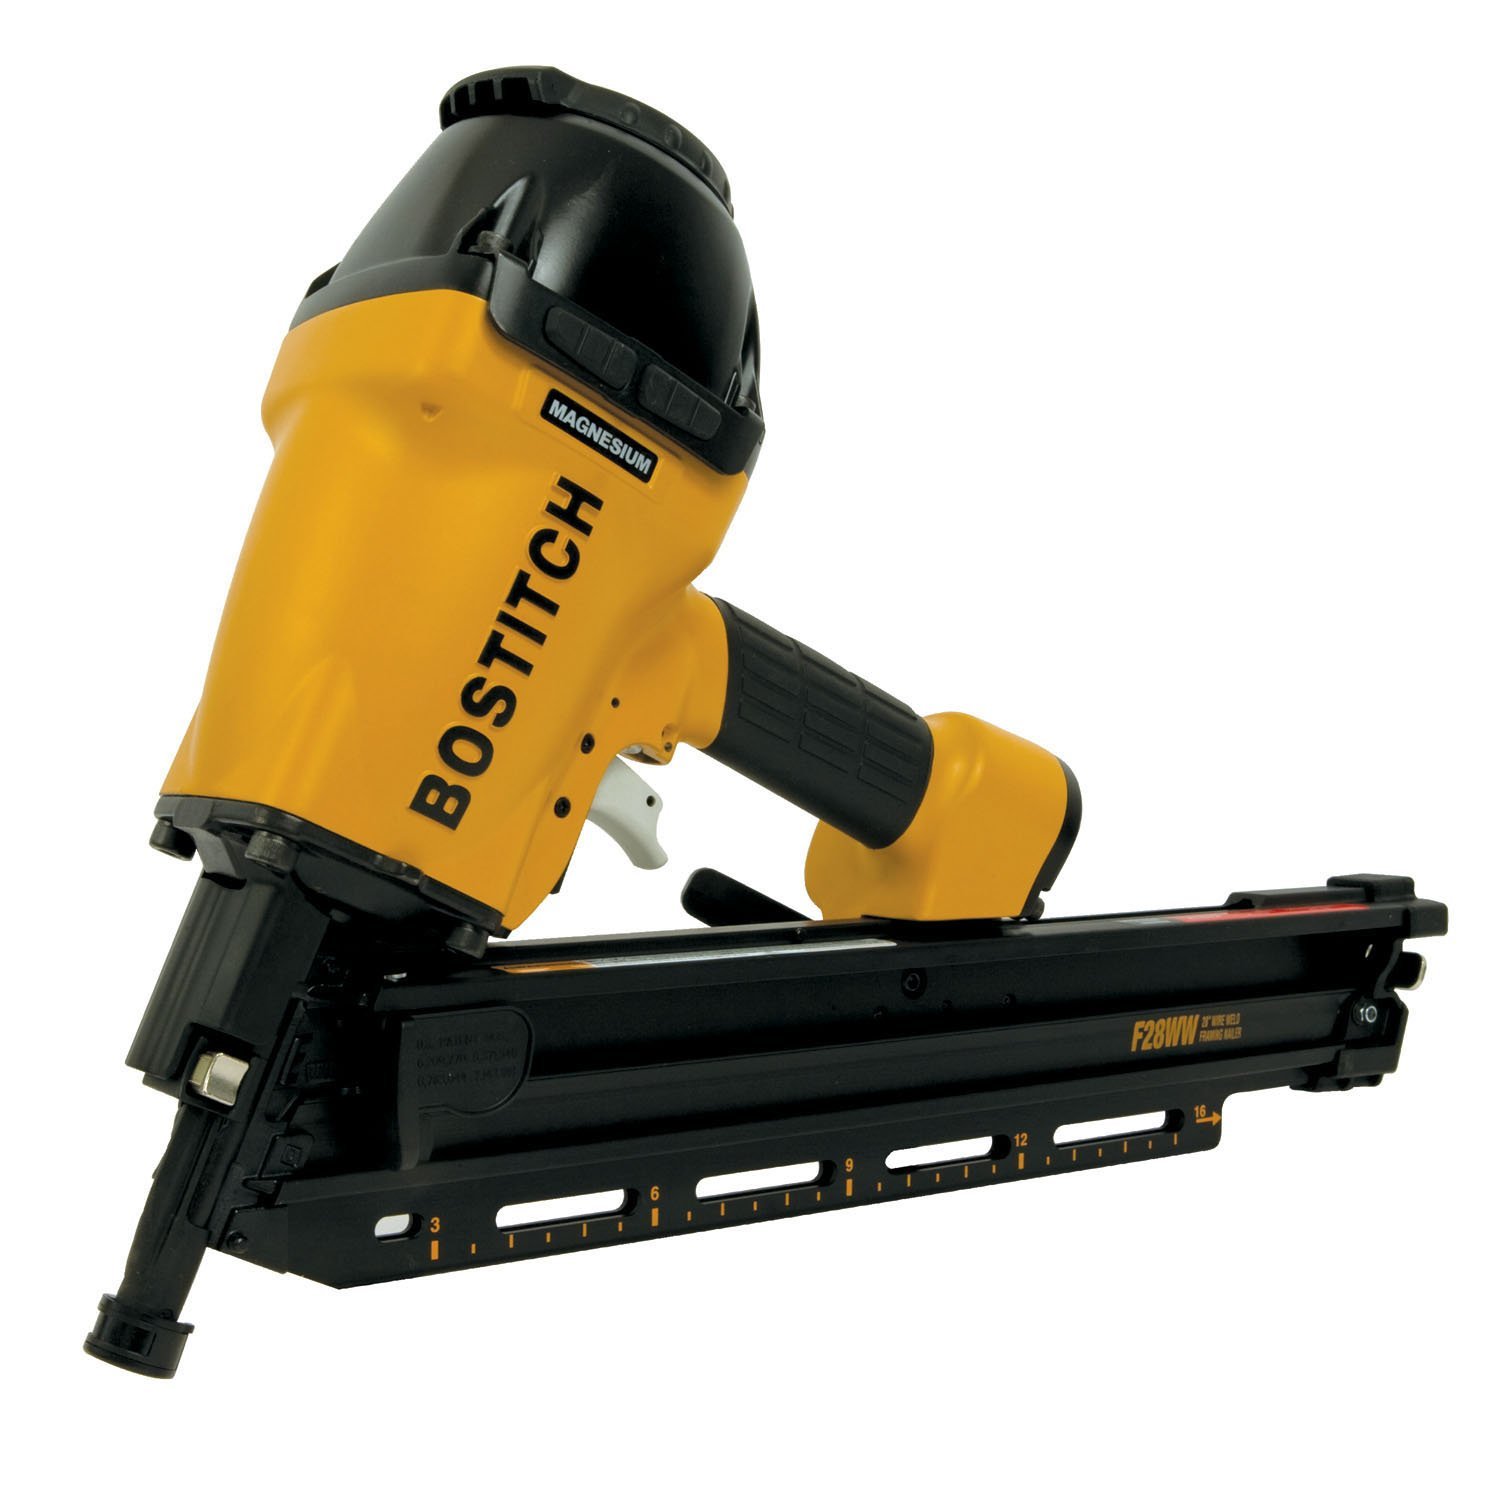 Stanley Bostitch BOSTITCH F28WW Clipped Head 2-inch to 3-1/2-inch Framing Nailer with Magnesium Housing